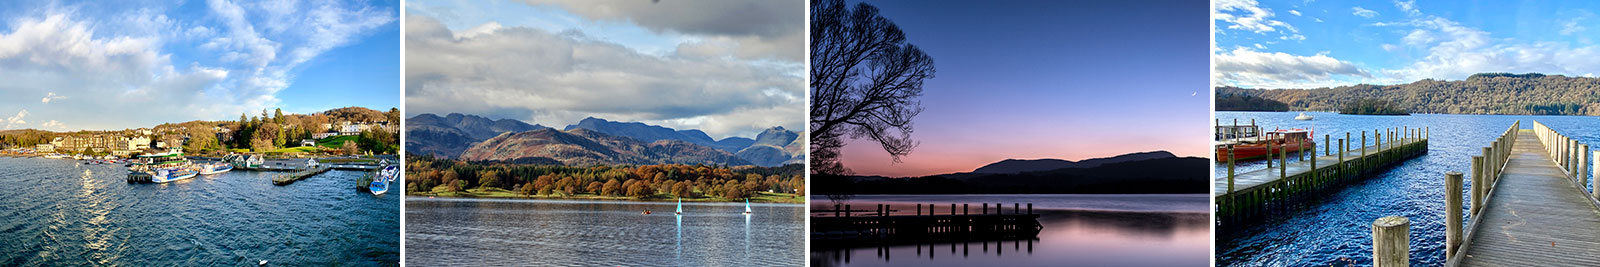 The Lakes International Comic Arts Festival - Bowness-on-Windermere